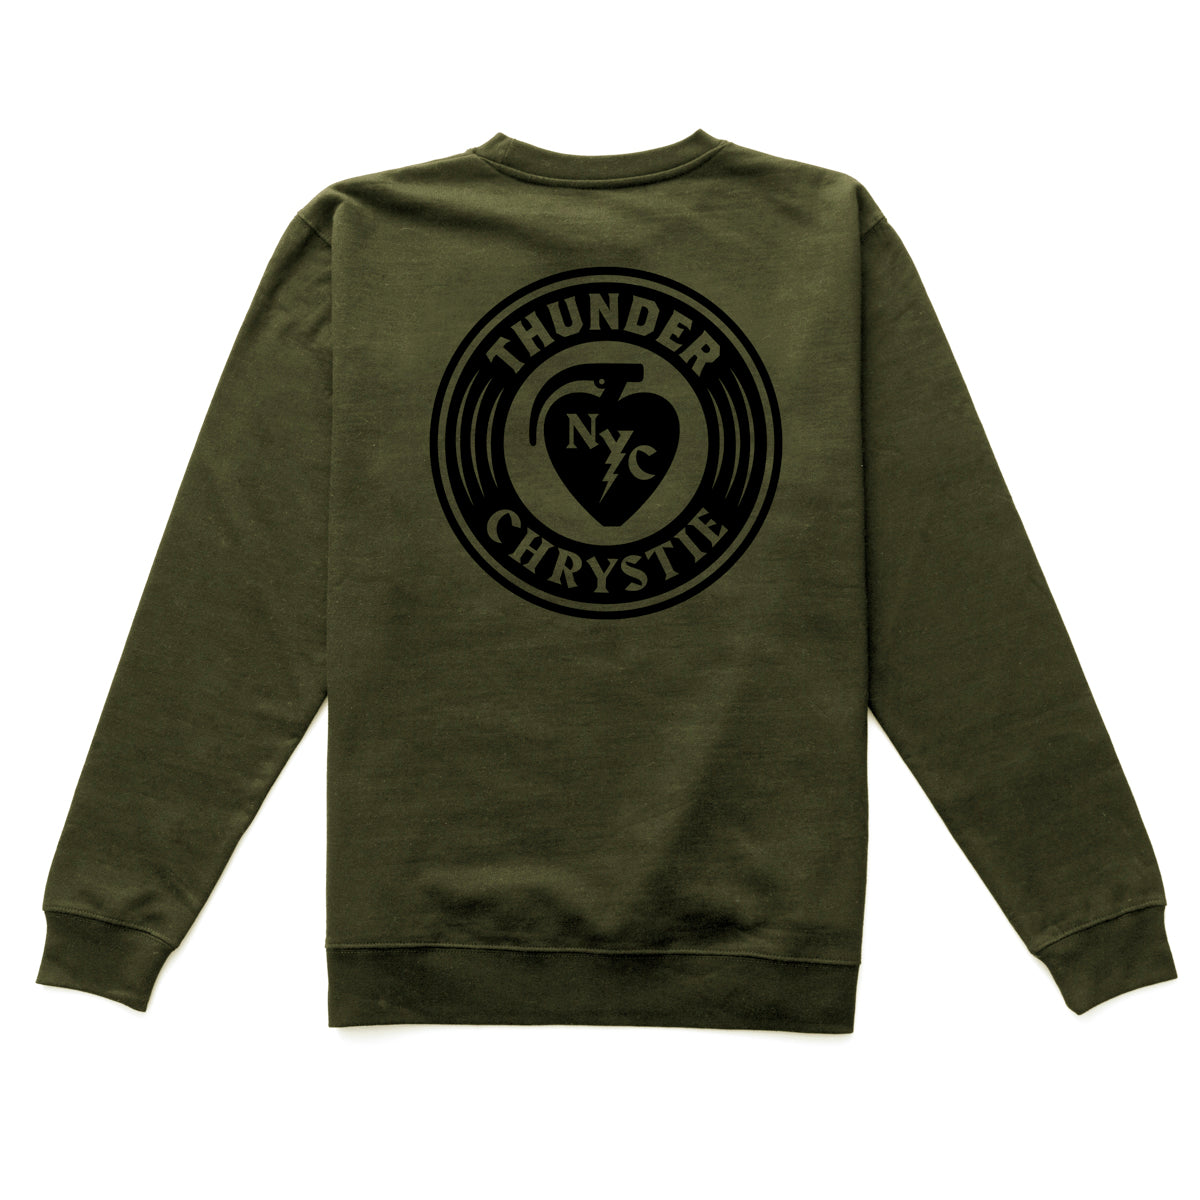 Load image into Gallery viewer, Chrystie x Thunder Circle Logo Crewneck ARMY GREEN